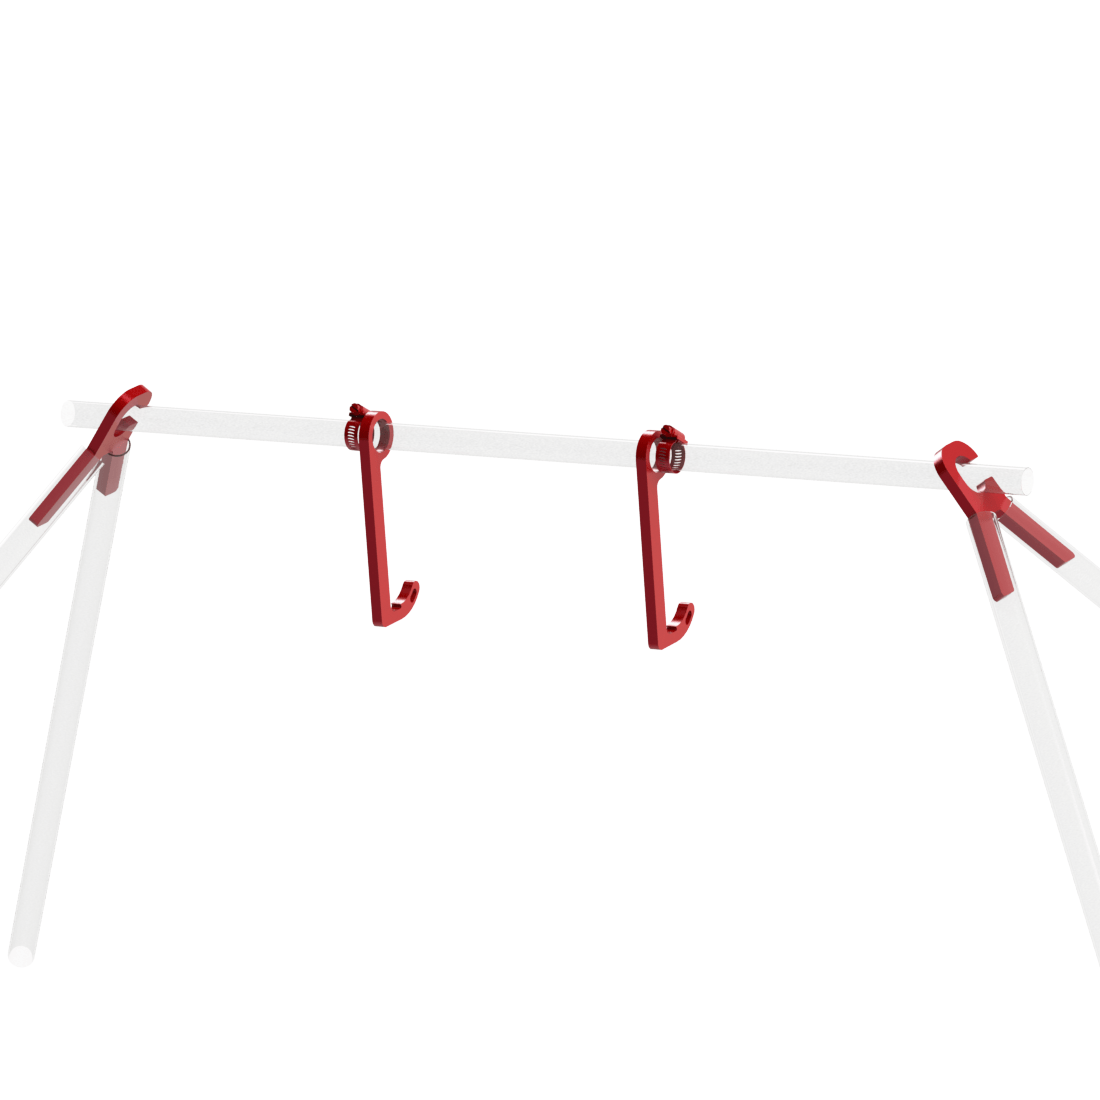 Gong Hanger Kit - Single or Double Hooks (Parts shown in red)